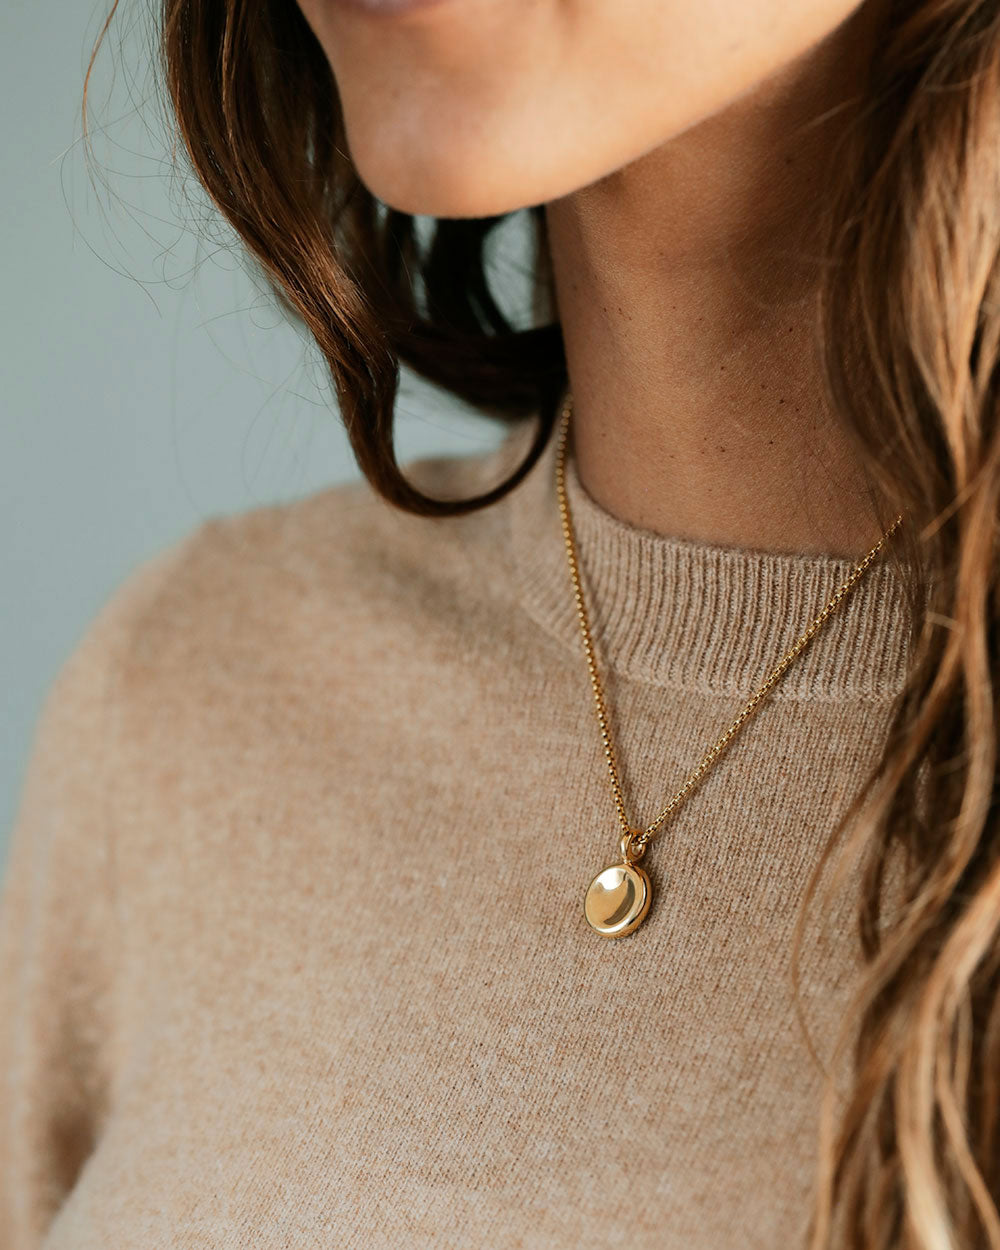 Woman wearing Button Grand pendant on round box chain by George Rings solid 18k gold circle charm pendant necklace